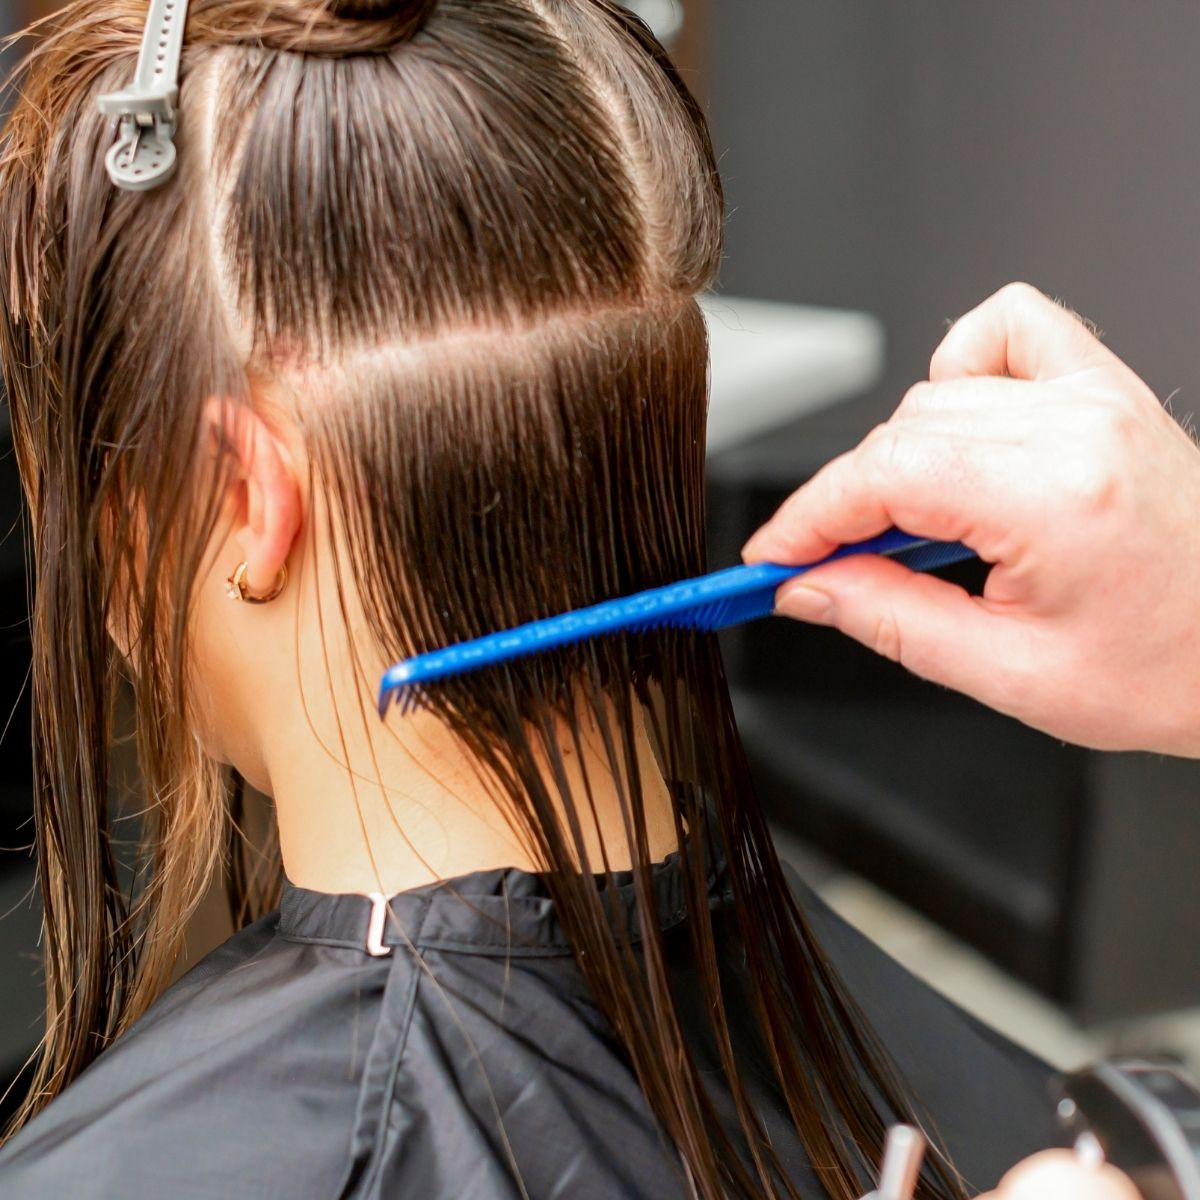 A hairdresser using the right comb for hairstylists